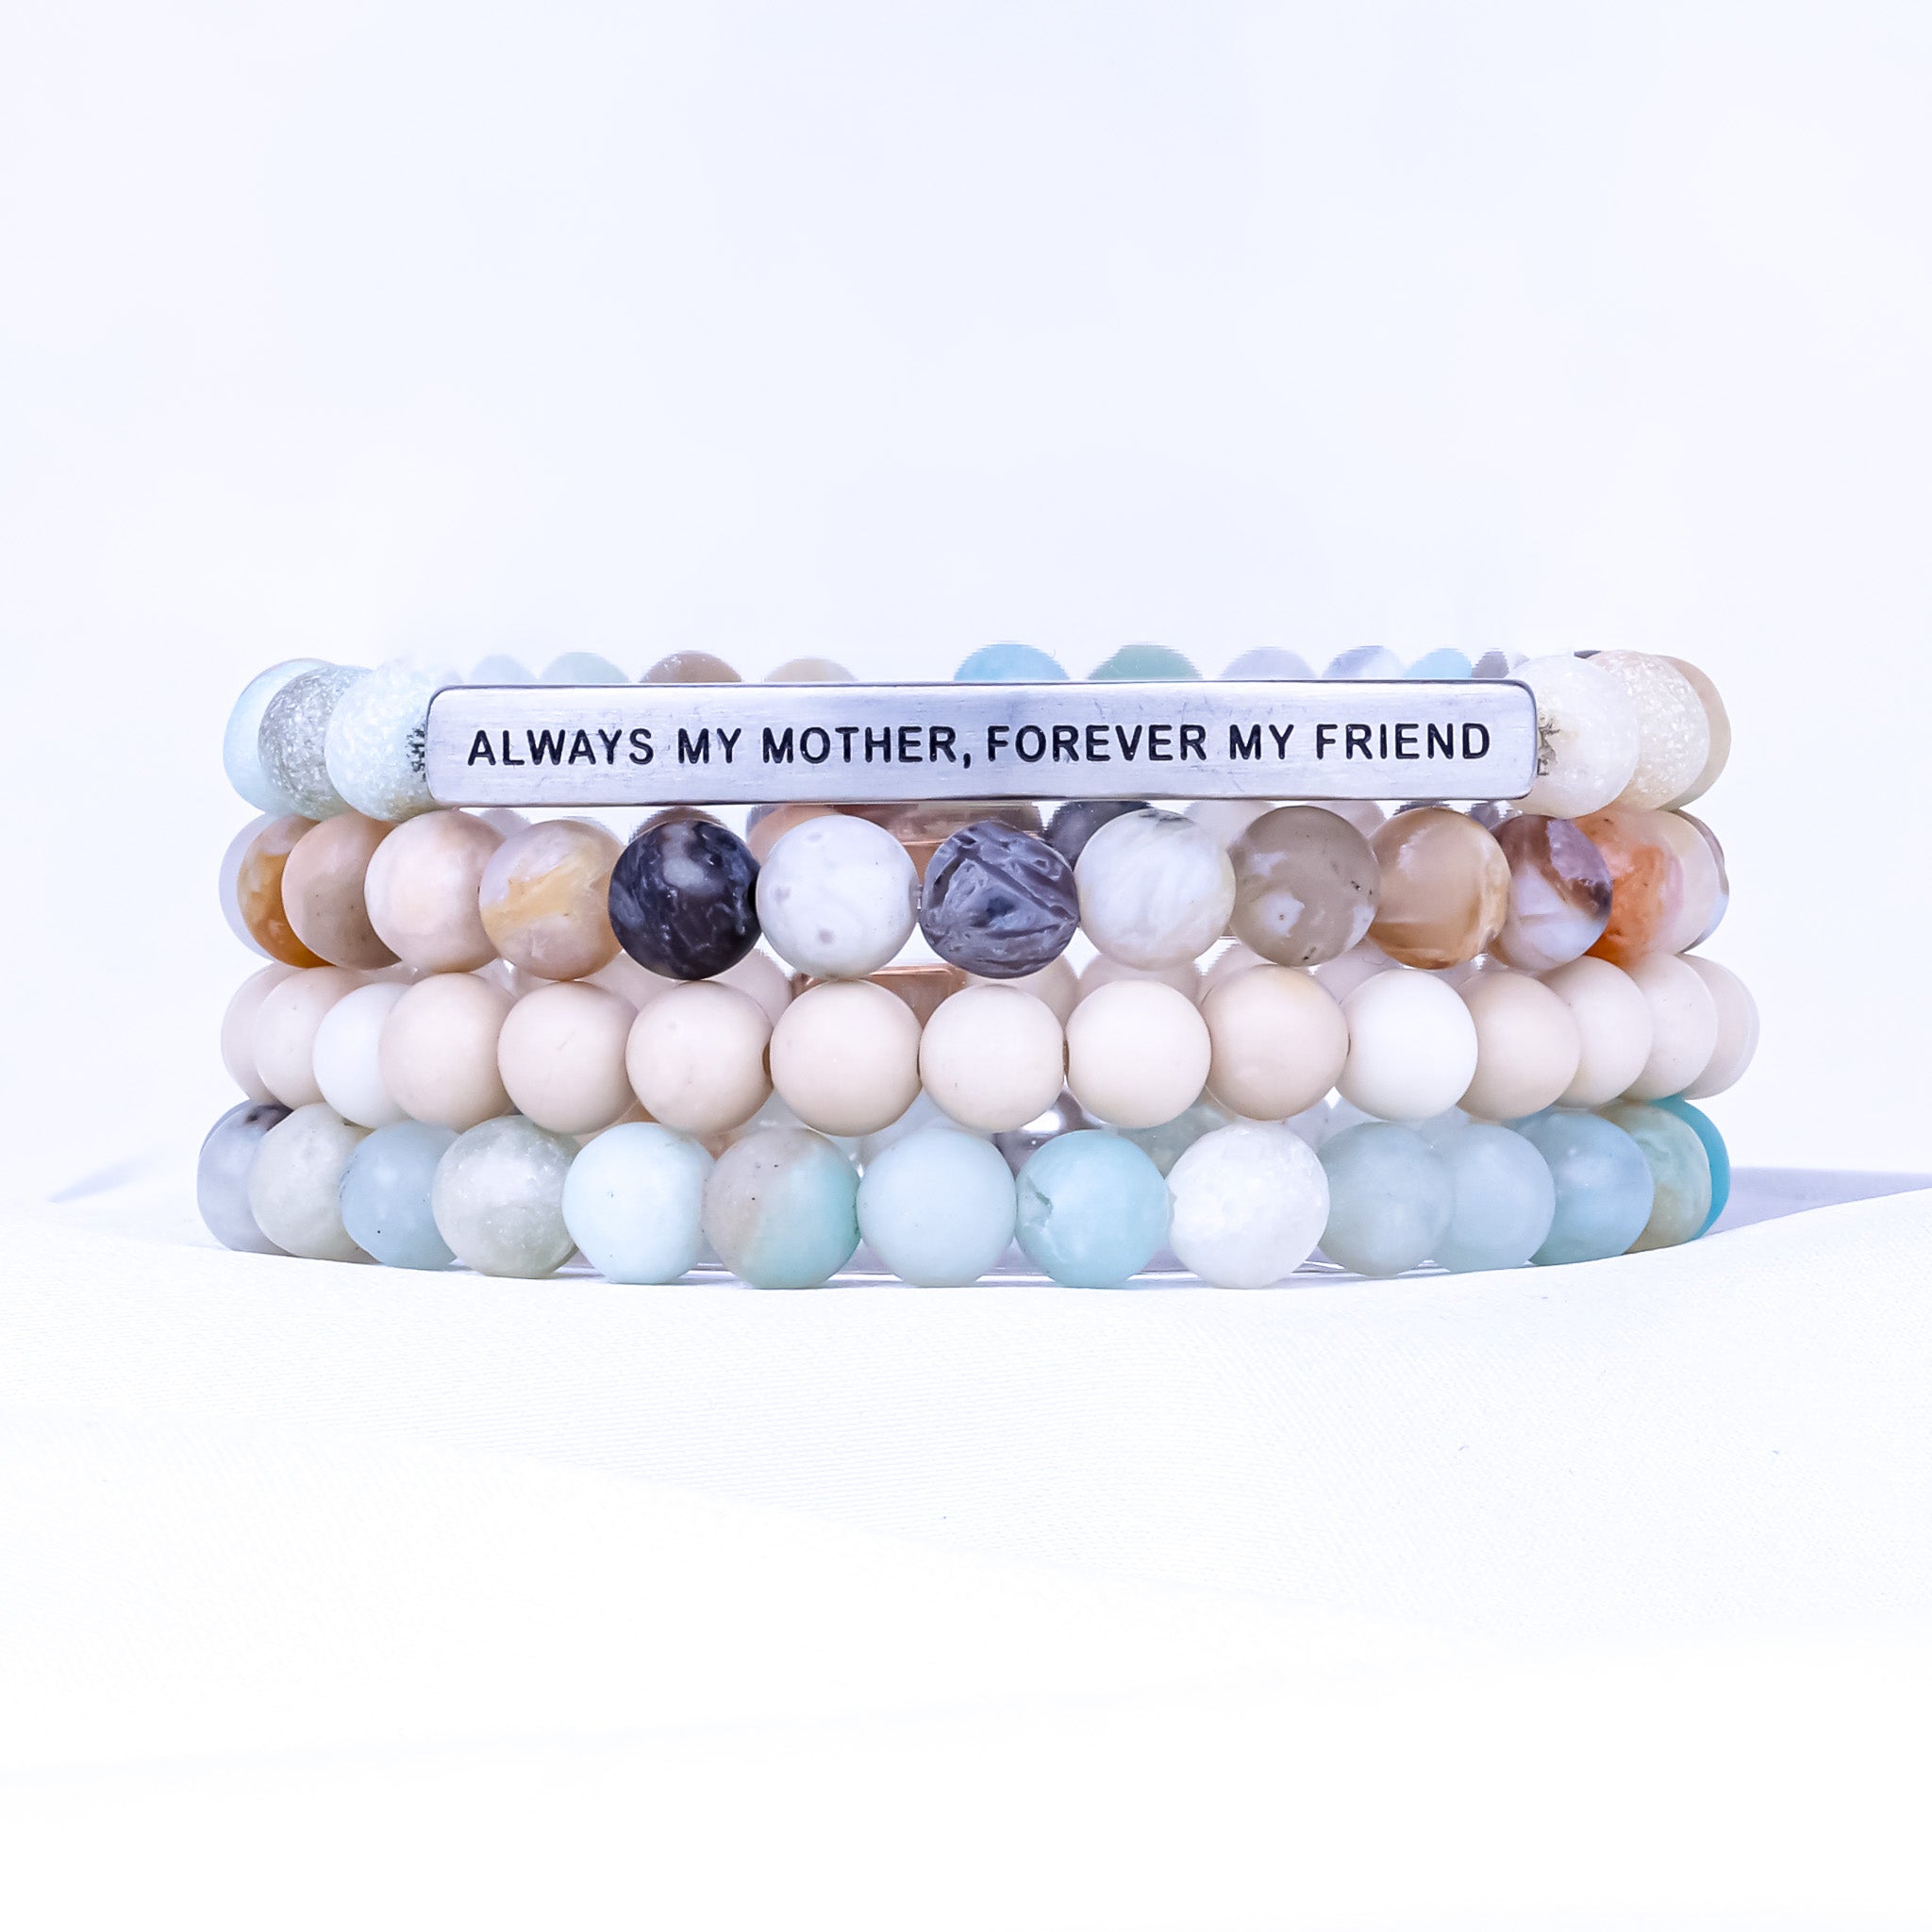 SHOP - ALWAYS MY MOTHER, FOREVER MY FRIEND – Inspiration Co.